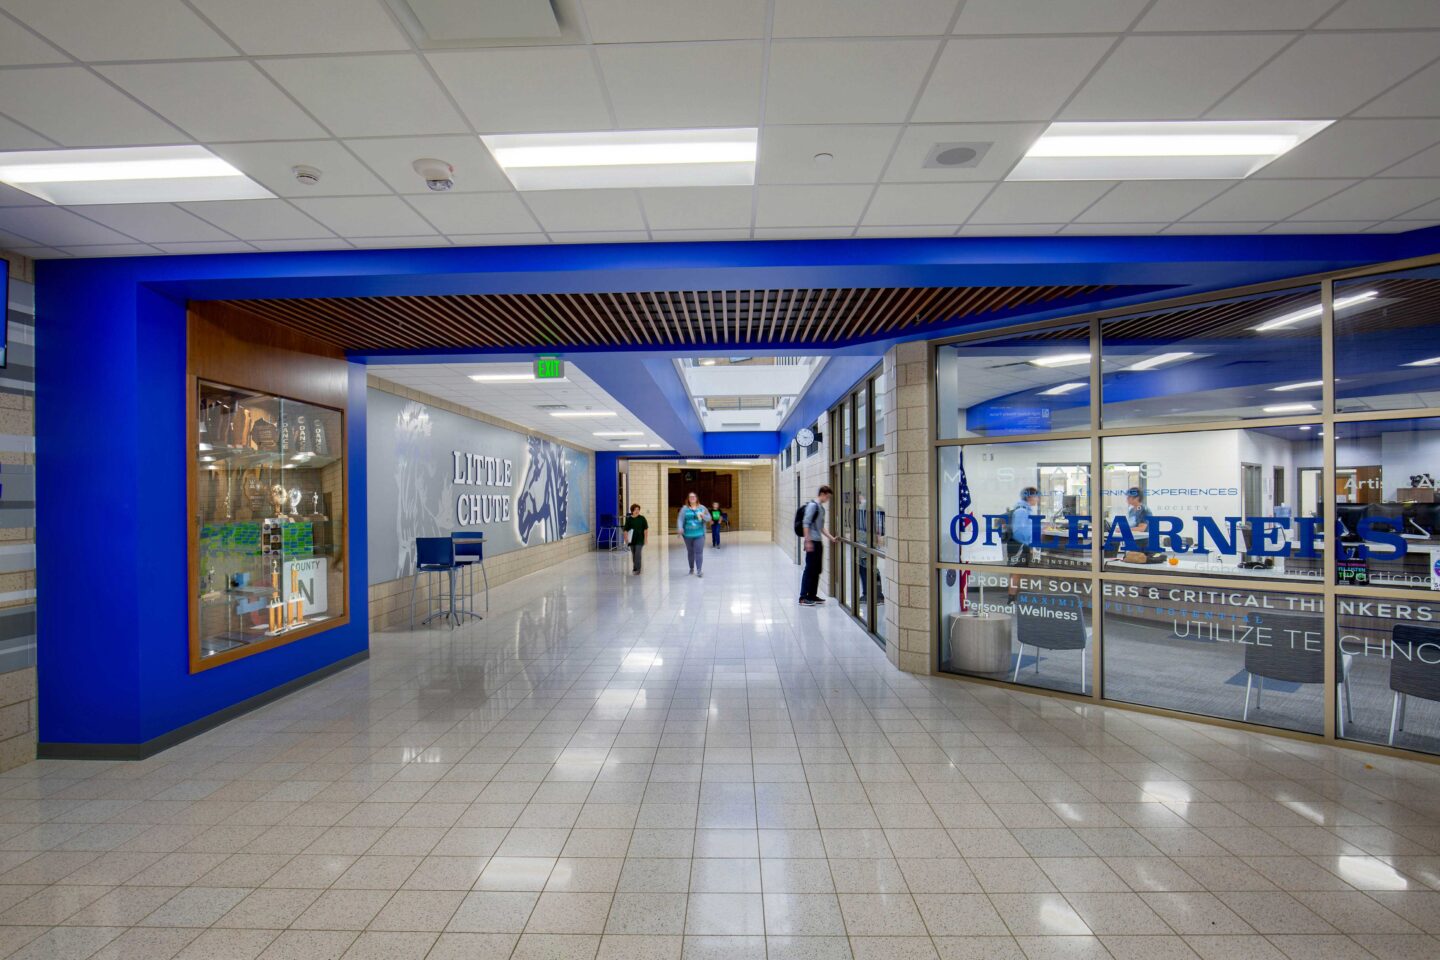 View of the entrance corridor at Little Chute Intermediate, Middle, and High School, which features display cases, a wall mural, and glass walls connecting to the office